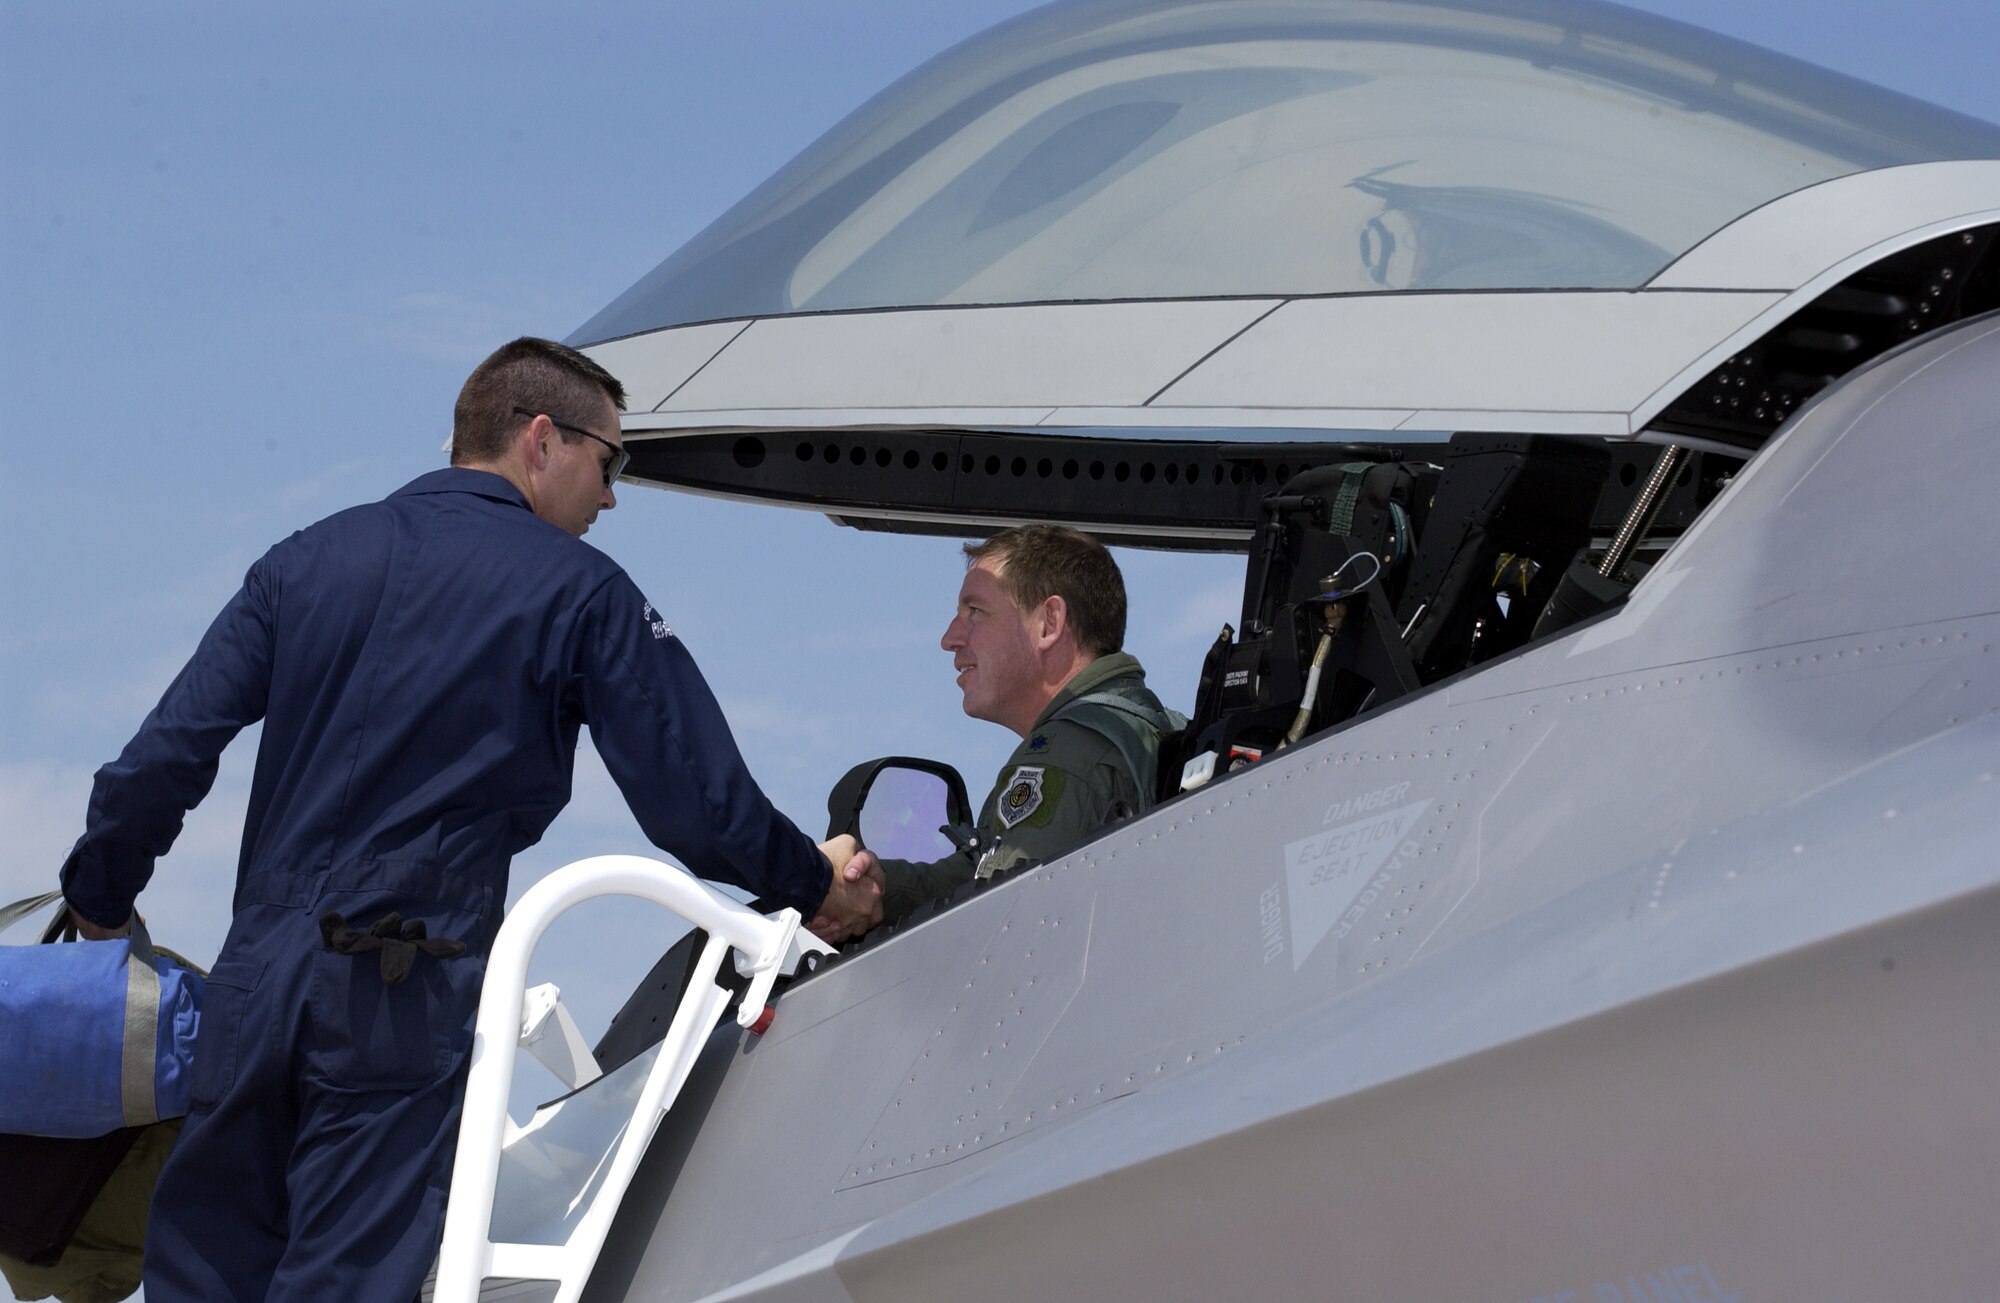 LANGLEY AIR FORCE BASE, Va. -- Staff Sgt. John Barr greets Lt. Col. James Hecker after delivering the first operational F/A-22 Raptor to its permanent home here May 12.  This is the first of 26 Raptors to be delivered to the 27th Fighter Squadron.  The Raptor program is managed by the F/A-22 System Program Office at Wright-Patterson Air Force Base, Ohio.  Colonel Hecker is the squadron's commander, and Sergeant Barr is an F/A-22 crew chief.  (U.S. Air Force photo by Staff Sgt. Elizabeth Weinberg)
